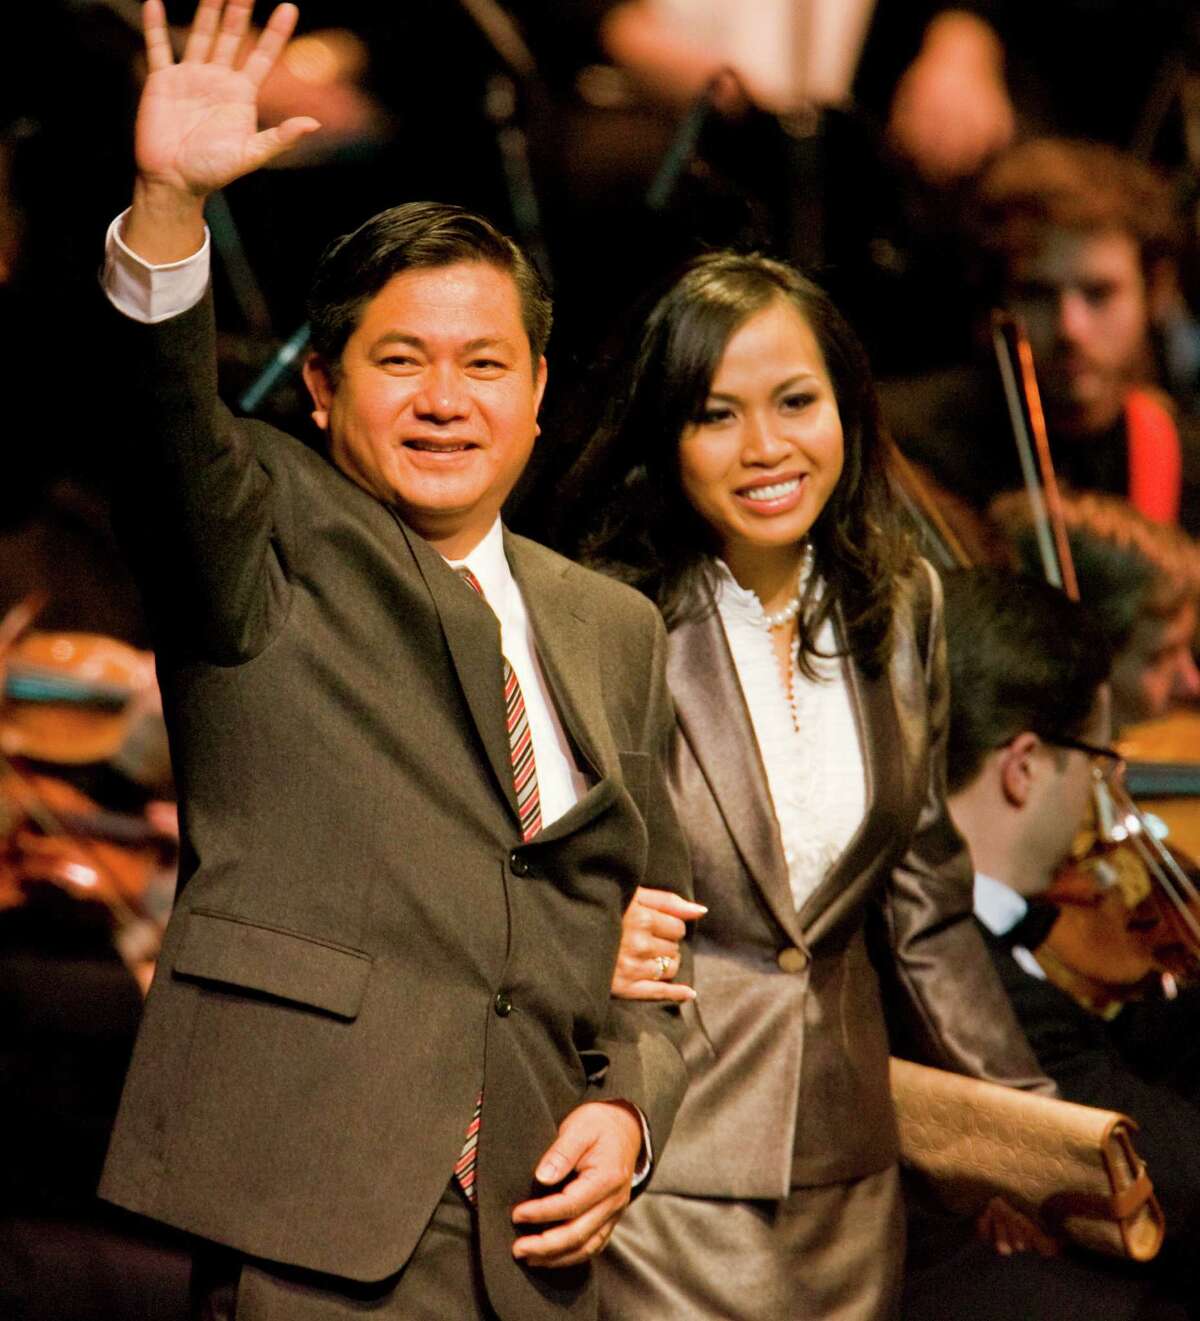 City Councilman Al Hoang waves to the crowd during the ceremonial and public swearing in of Mayor Annise Parker and the rest of the Houston City Council members, Monday, Jan. 4, 2010, at the Wortham Theater in Houston. ( Karen Warren / Chronicle )